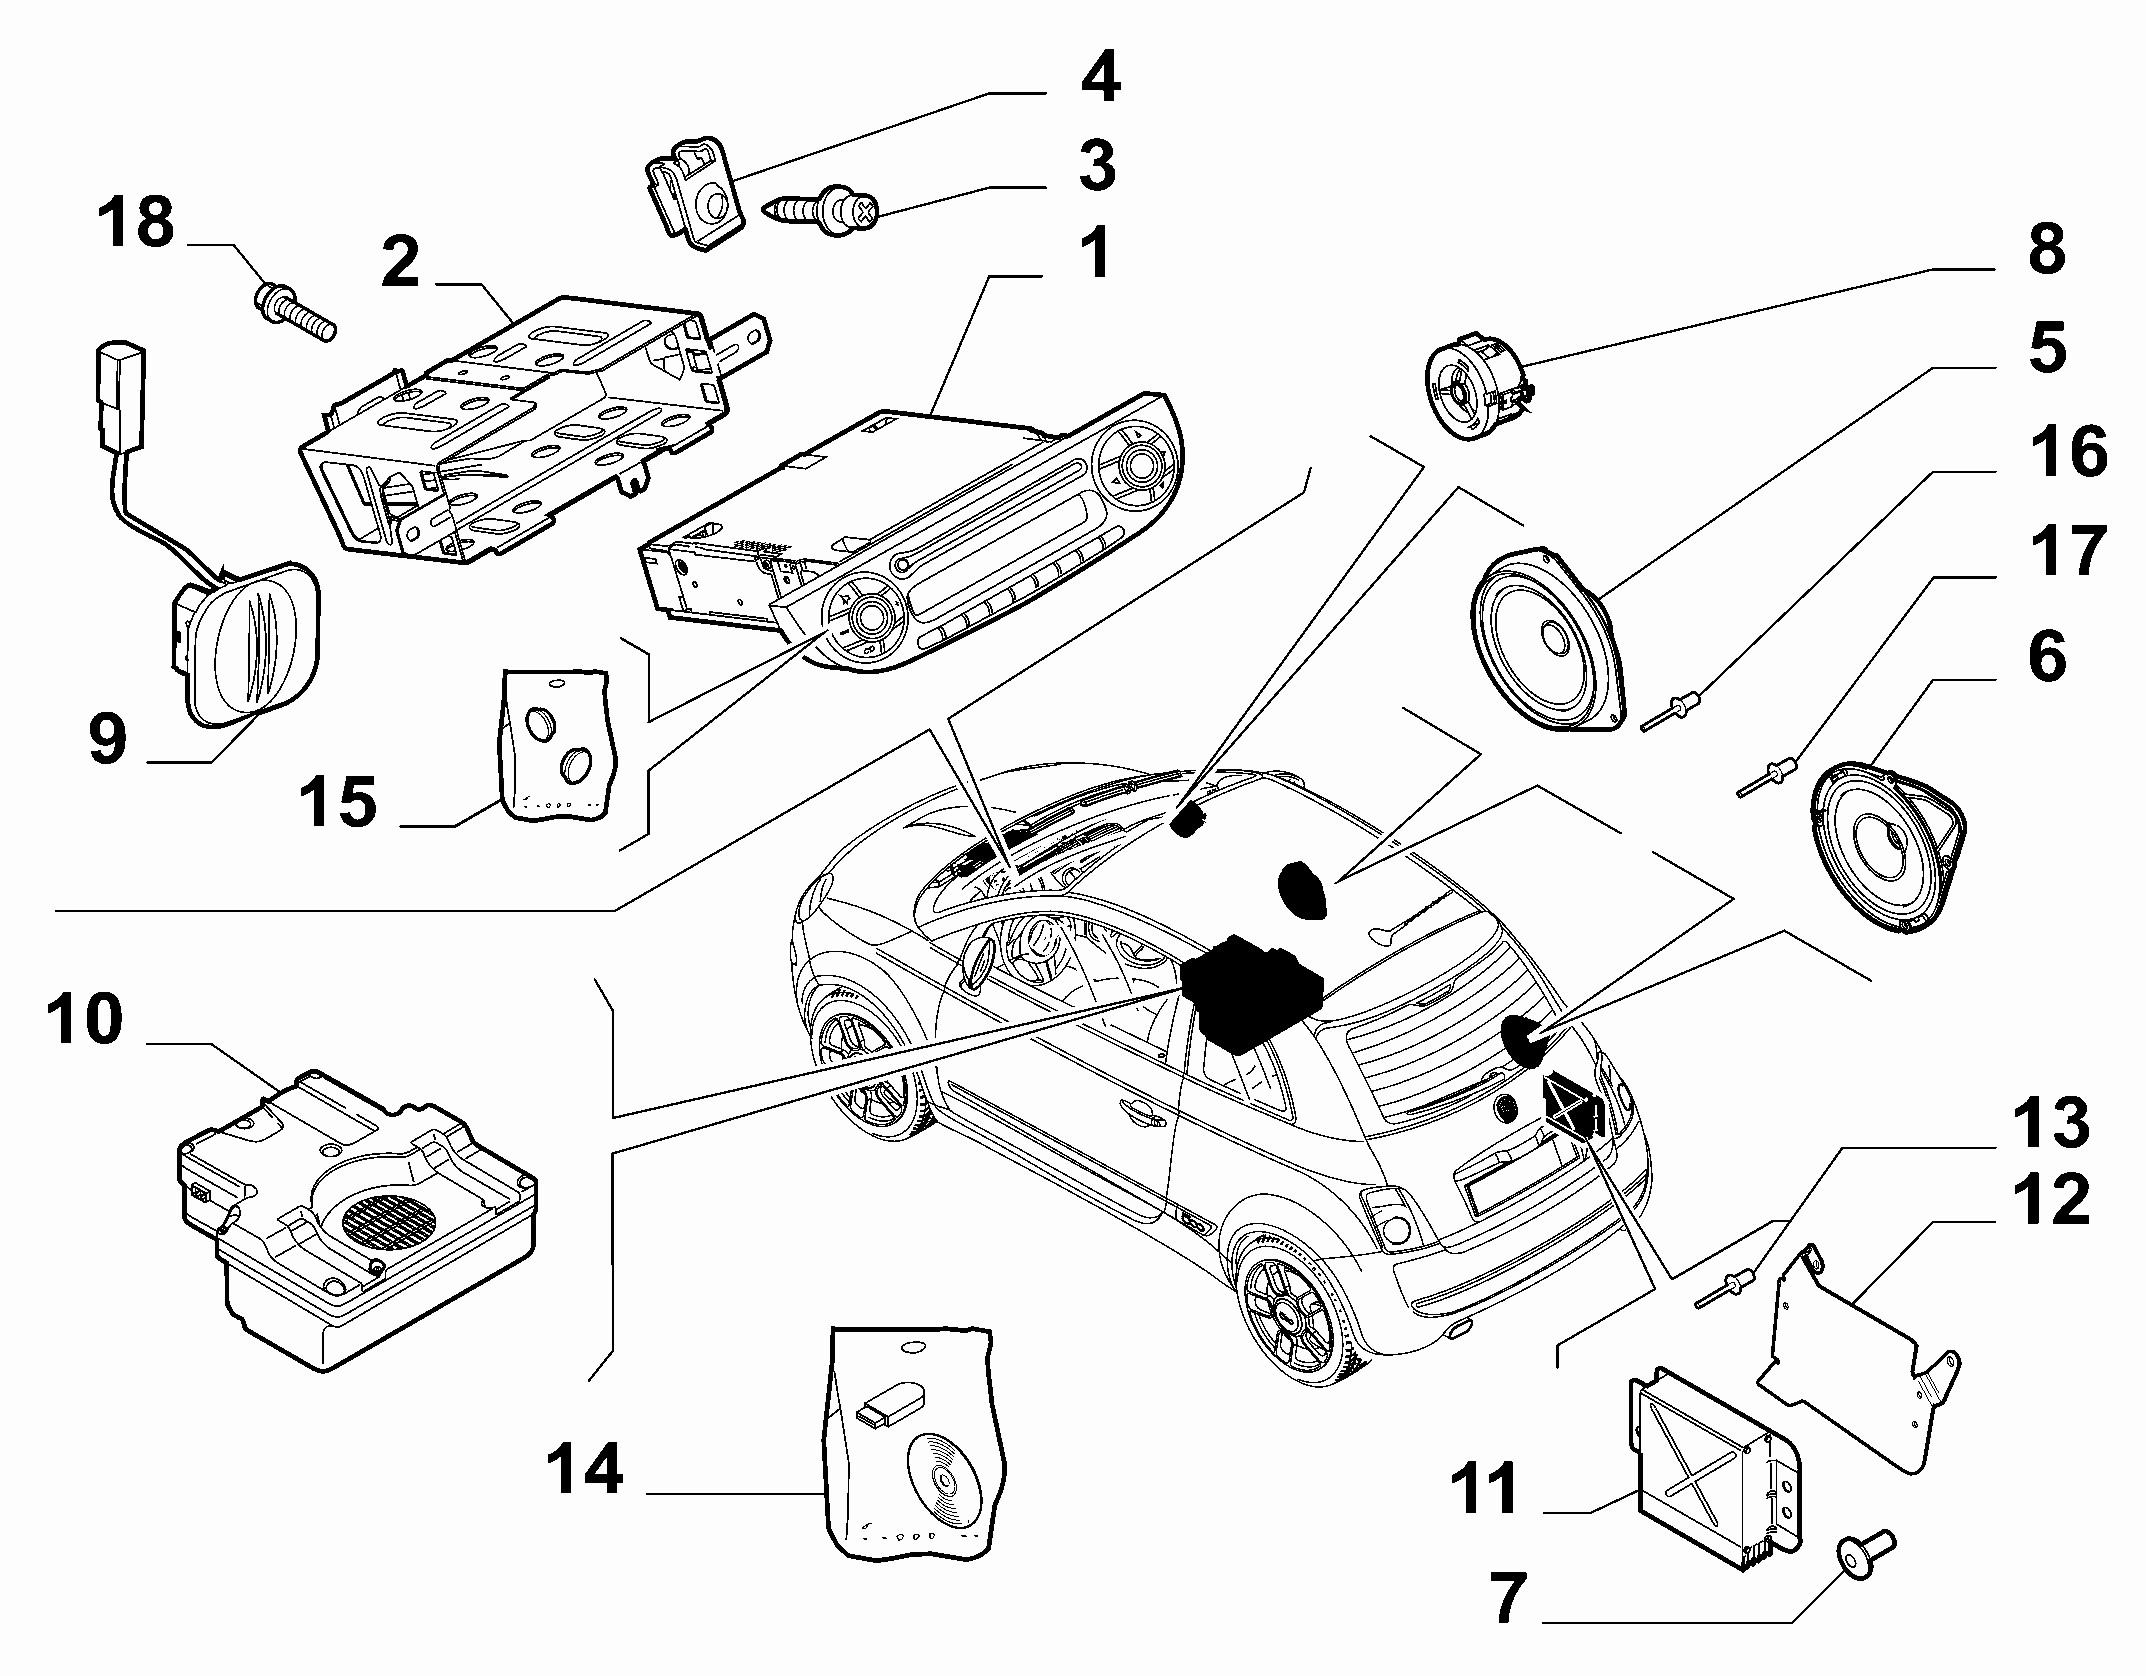 Diagram Of Suspension On A Car Abarth Electronic System Apparatus and Electric Controls Of Diagram Of Suspension On A Car